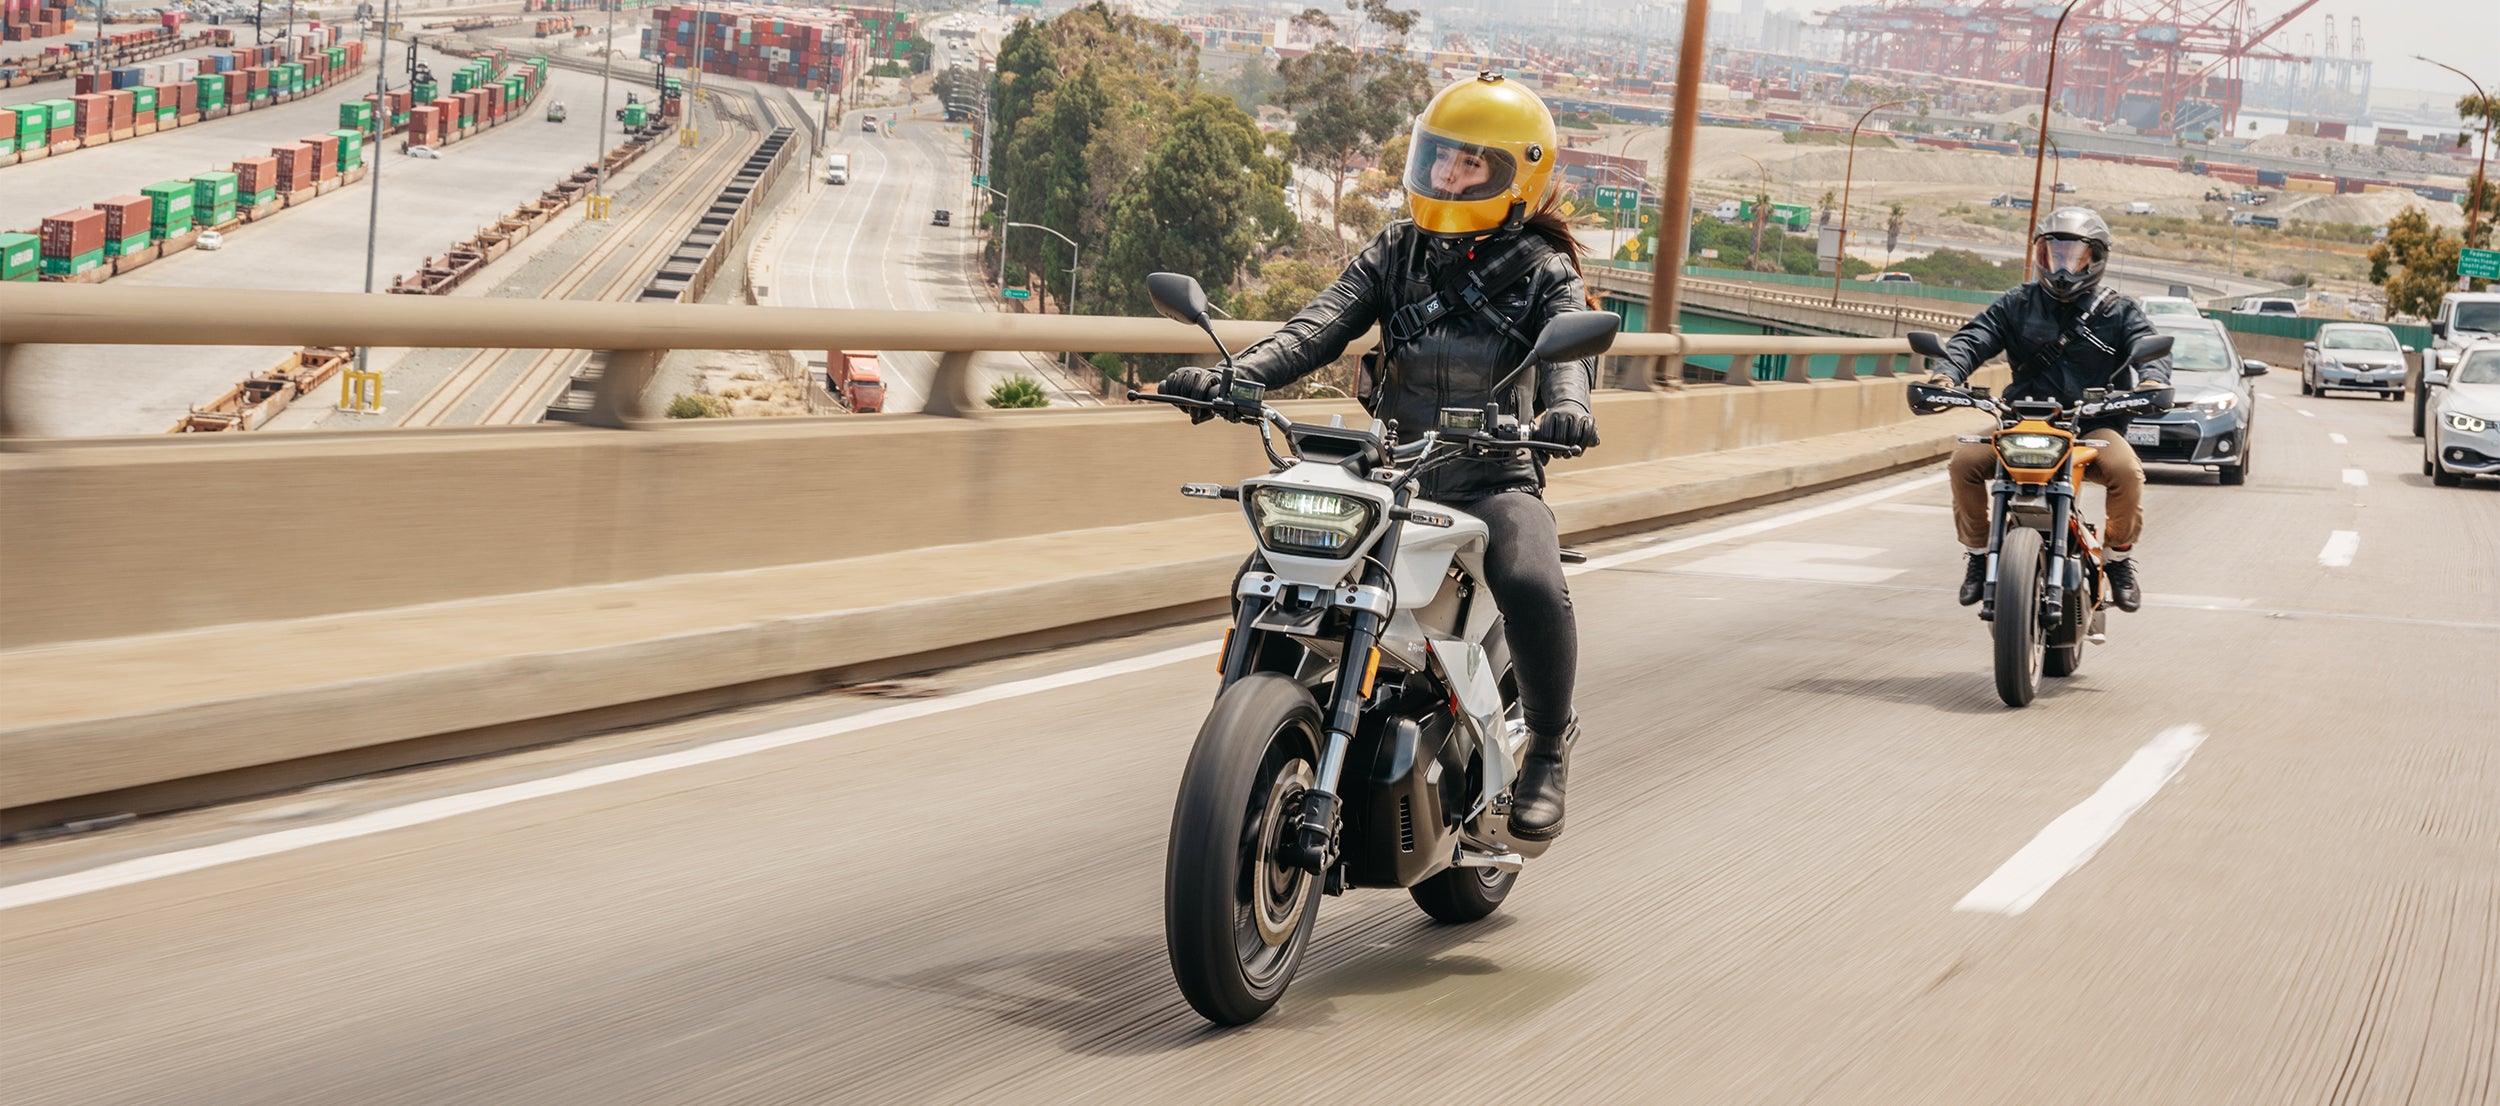 Ryvid Anthem launched as lower-cost 75 mph electric motorycle in the US